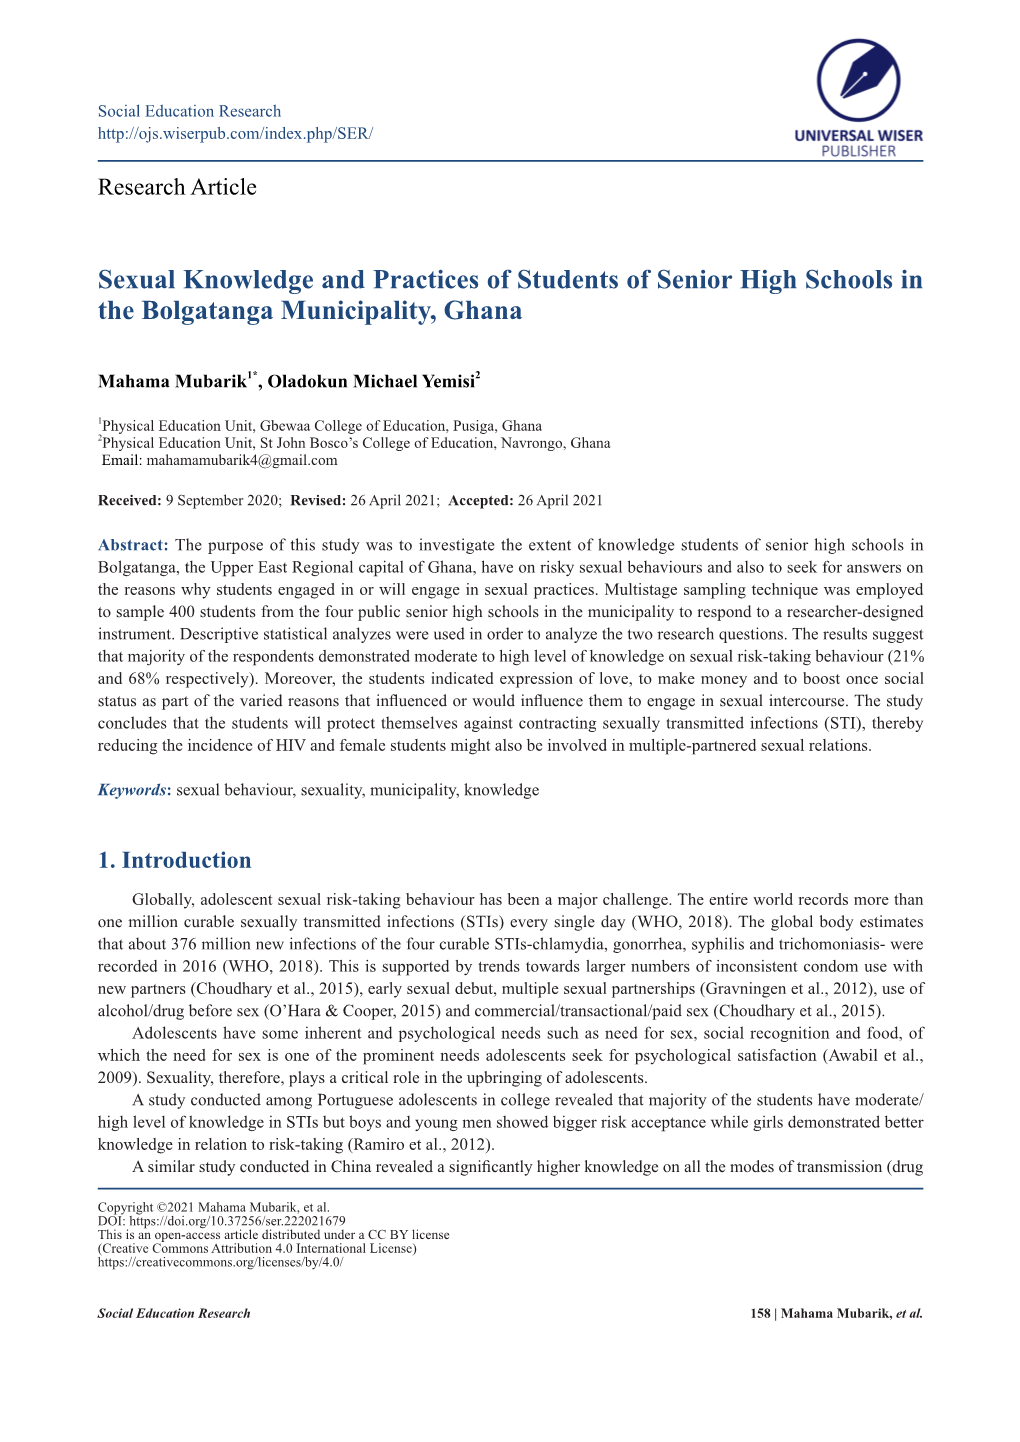 Sexual Knowledge and Practices of Students of Senior High Schools in the Bolgatanga Municipality, Ghana